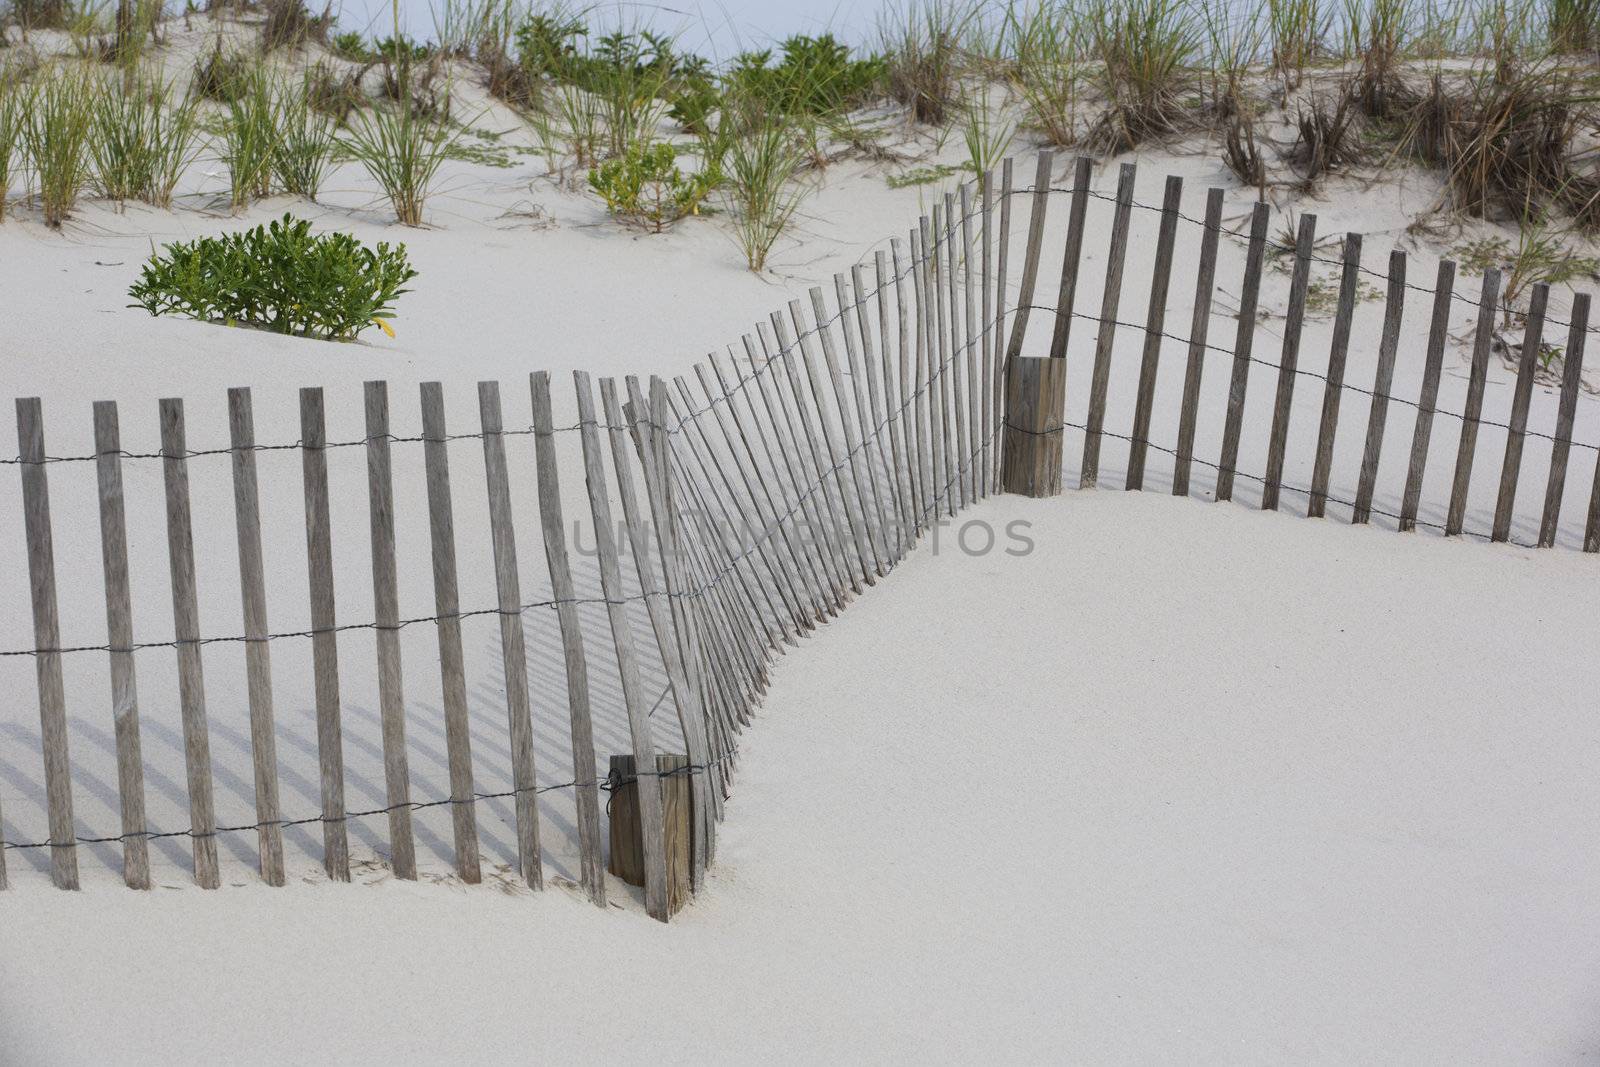 Bending and winding snow fencing on white sand with several accents of beach plants and shadows.  Location is New Jersey Shore, on the sand dunes of Island Beach State Park, a coast attraction for tourists and local families with trails, swimming, birding, fishing, and hiking. Landscape with copy space in lower right; 